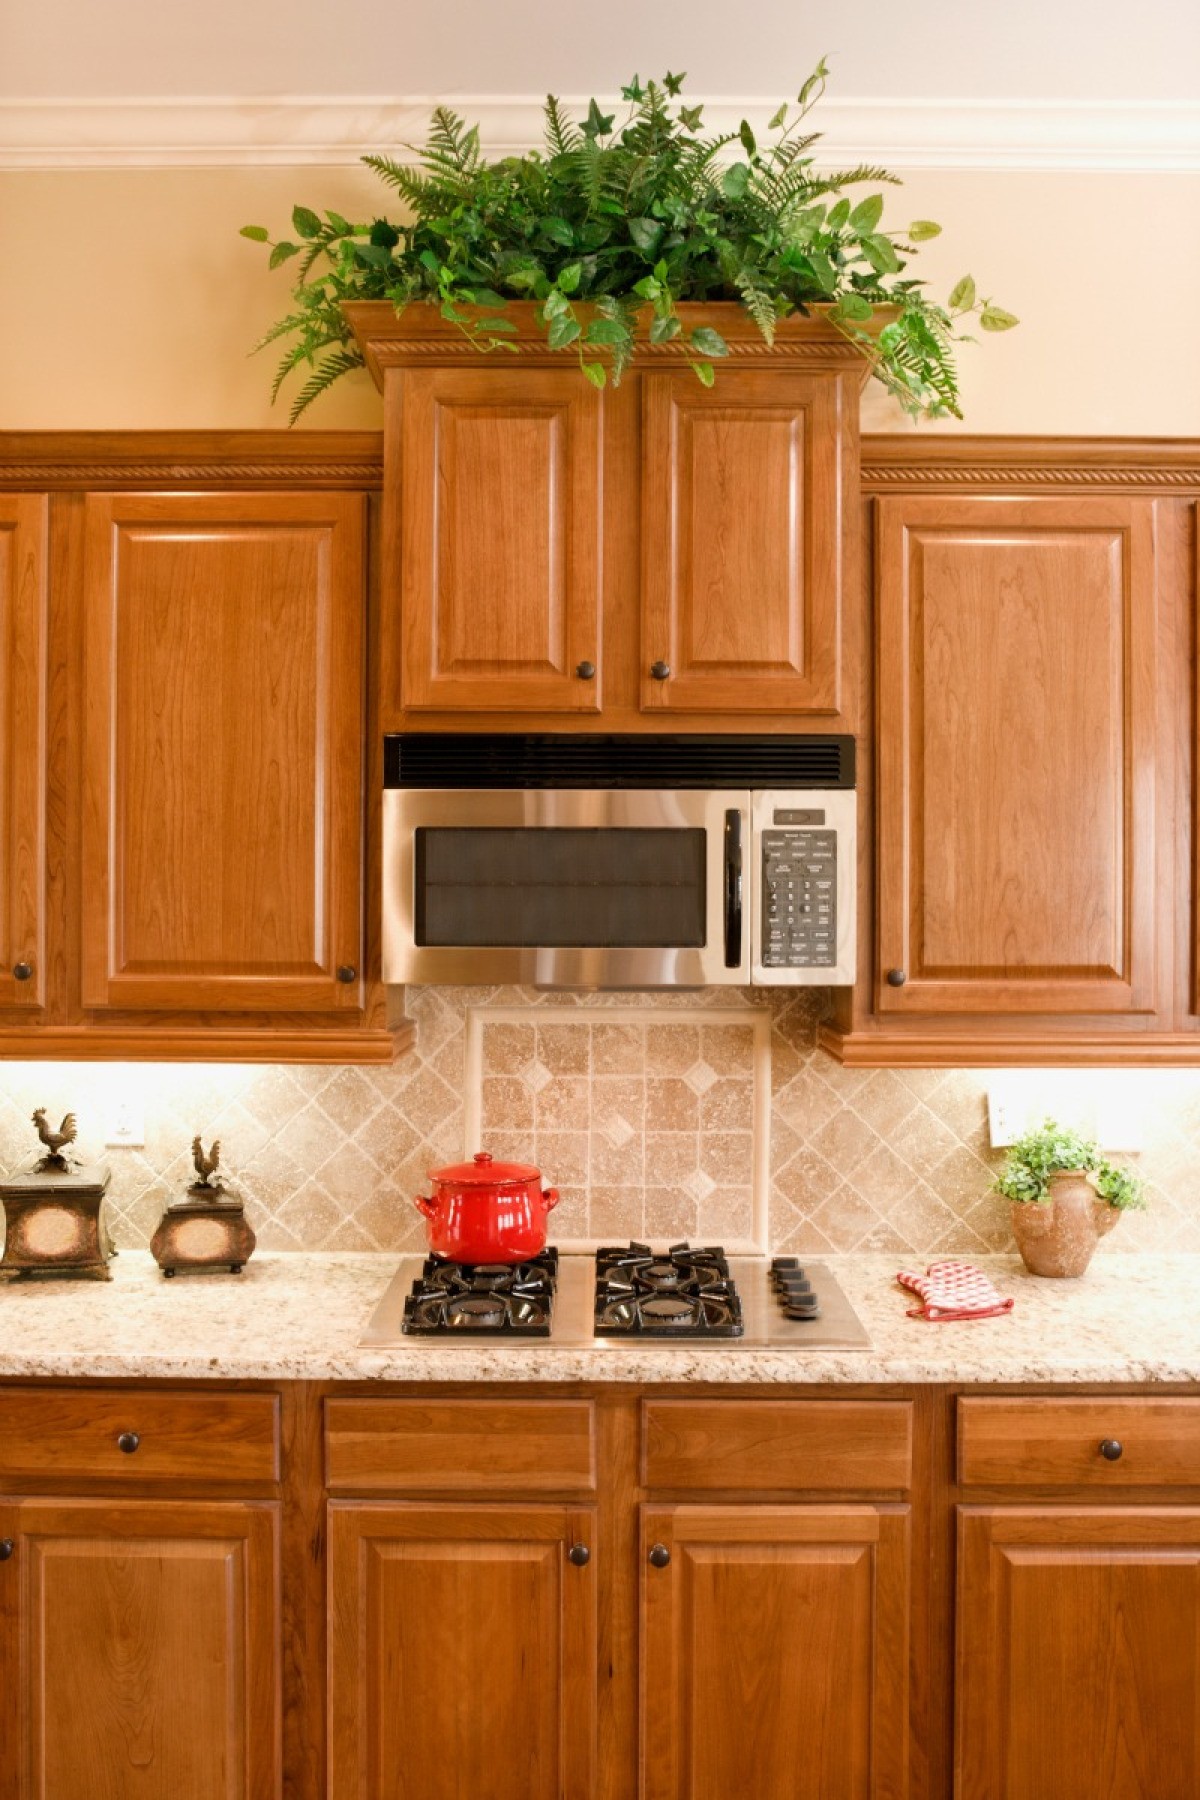 Cleaning Odors from Kitchen Cabinets